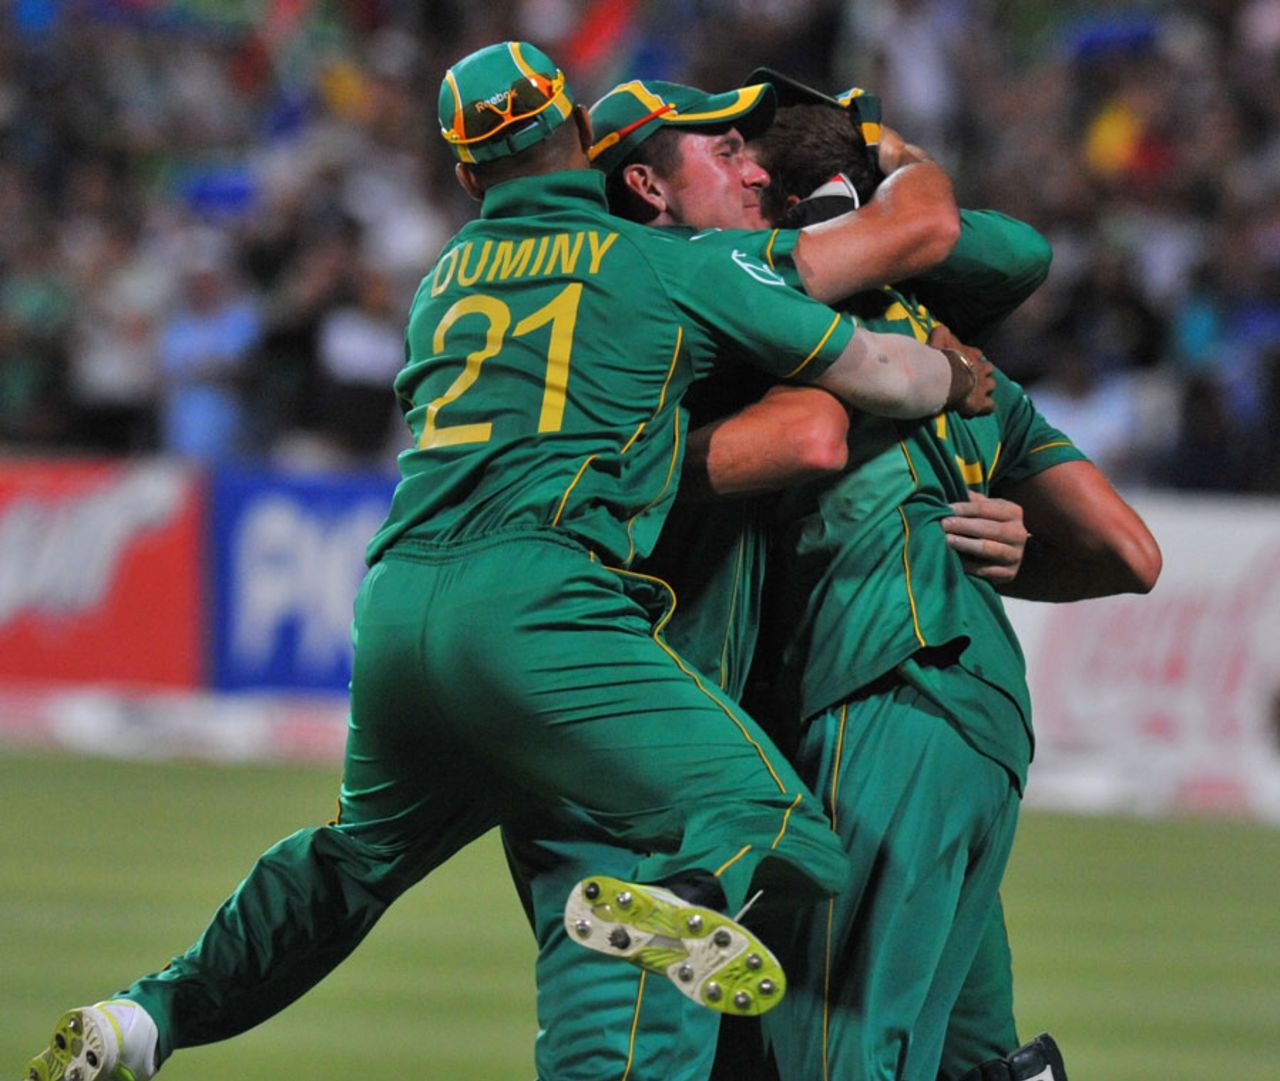 South Africa's players know the importance of Yusuf Pathan's wicket, South Africa v India, 3rd ODI, Cape Town, January 18, 2011